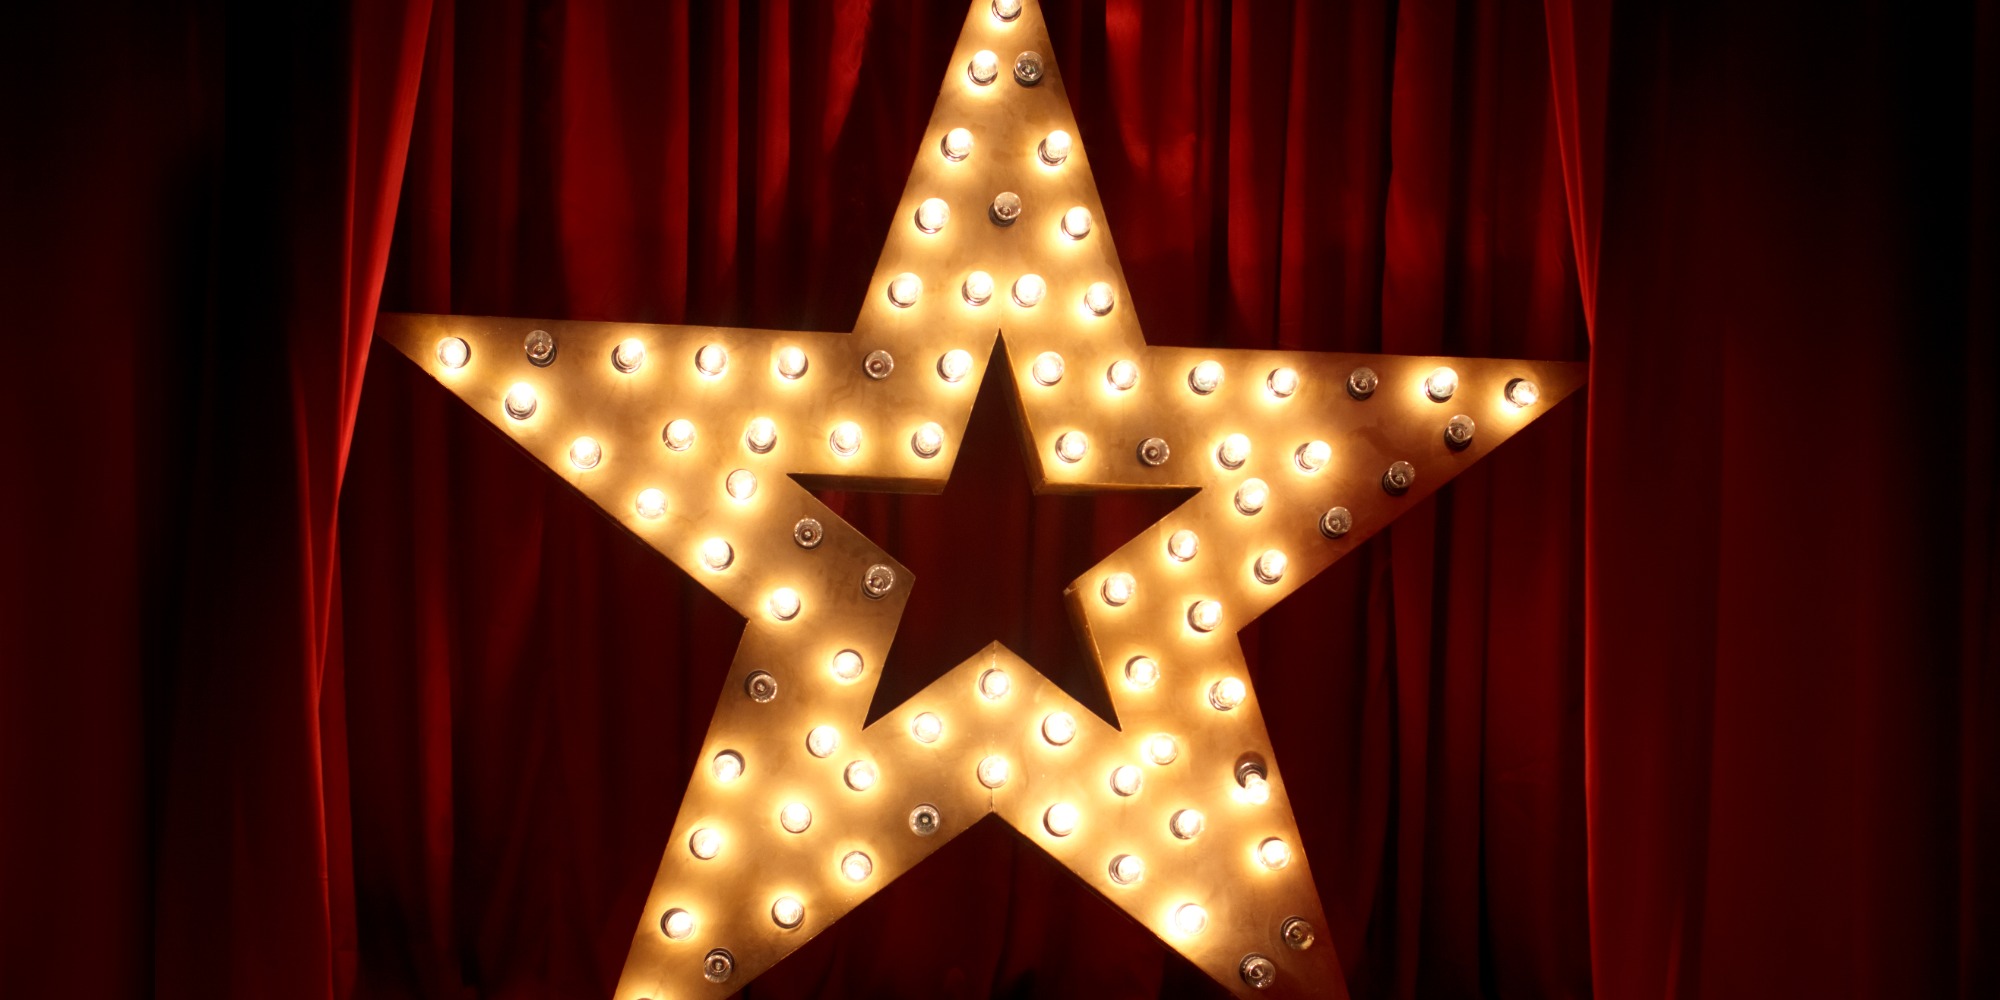 A five pointed star made up of a metal frame and many lightbulbs in front of a red Theatre curtain